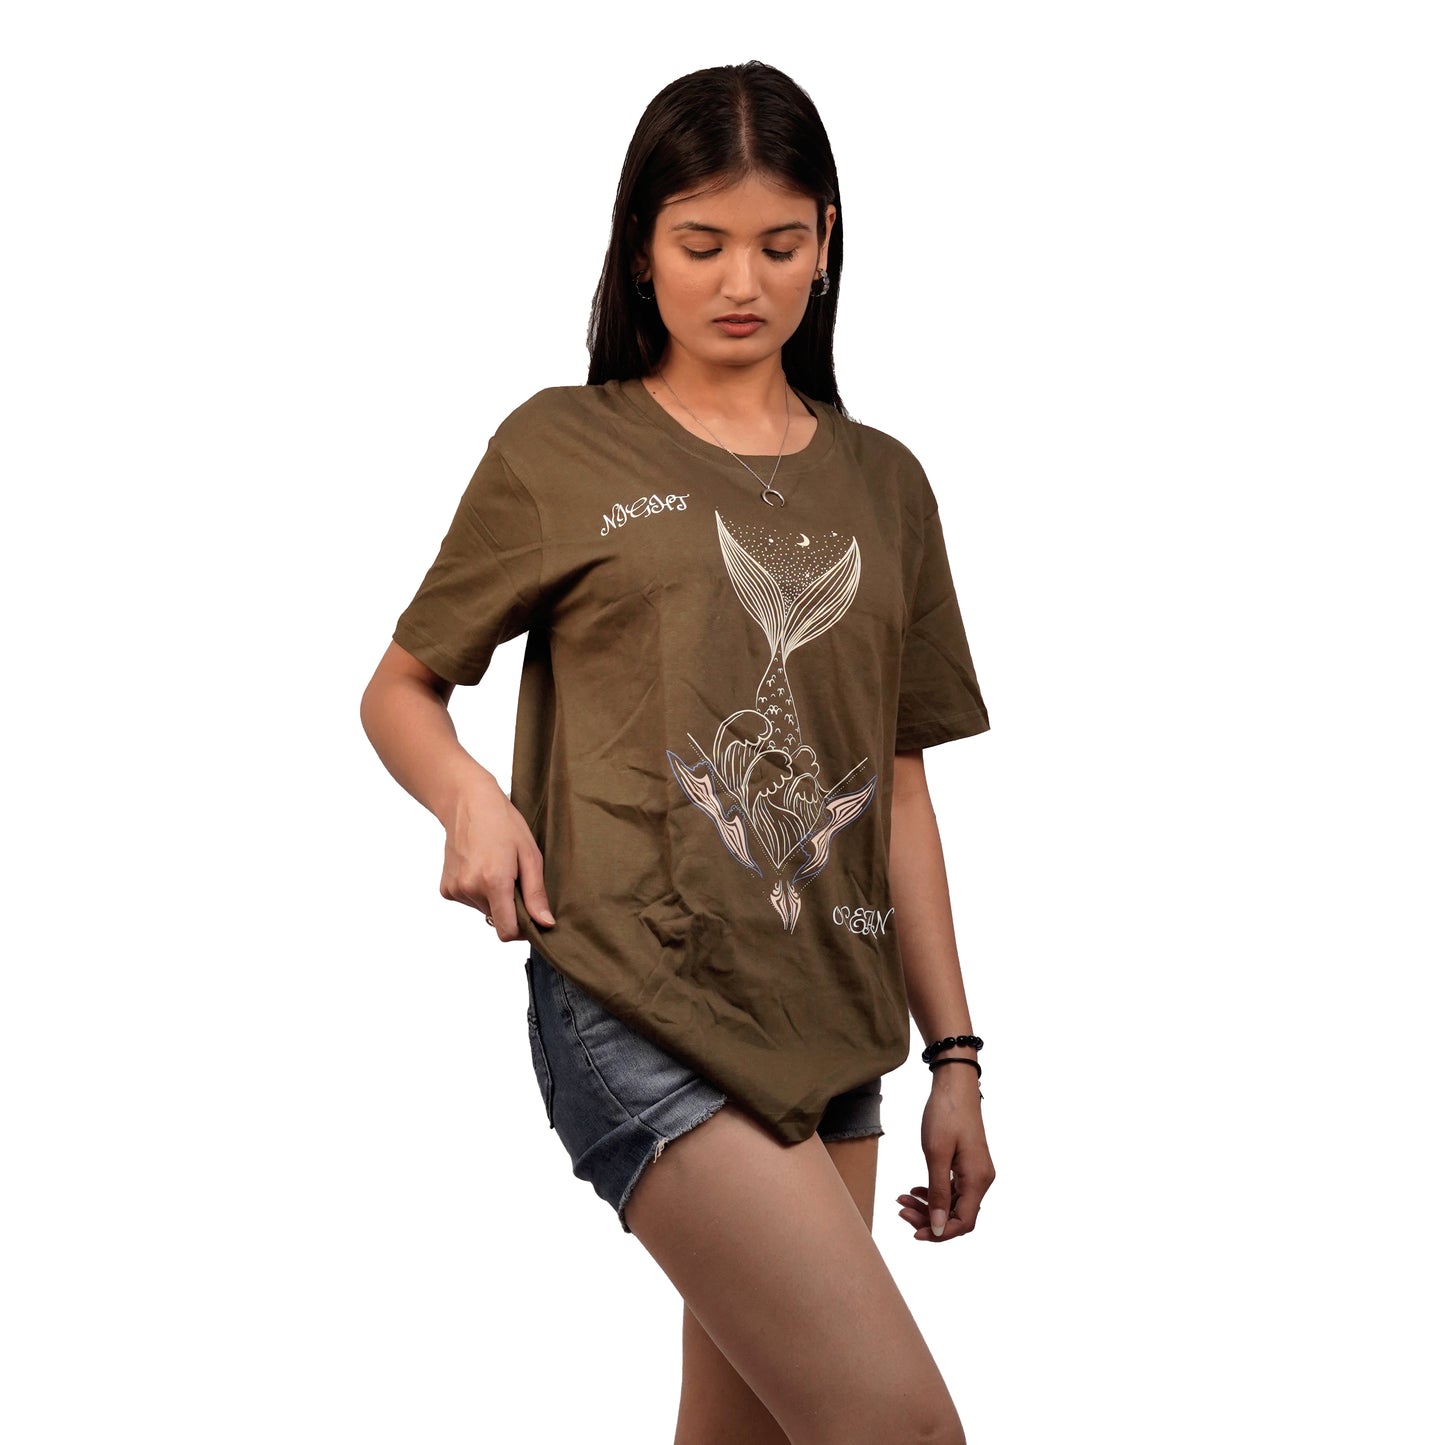 Nirvana Night Mermaid T-shirt In Olive Green Color For Women